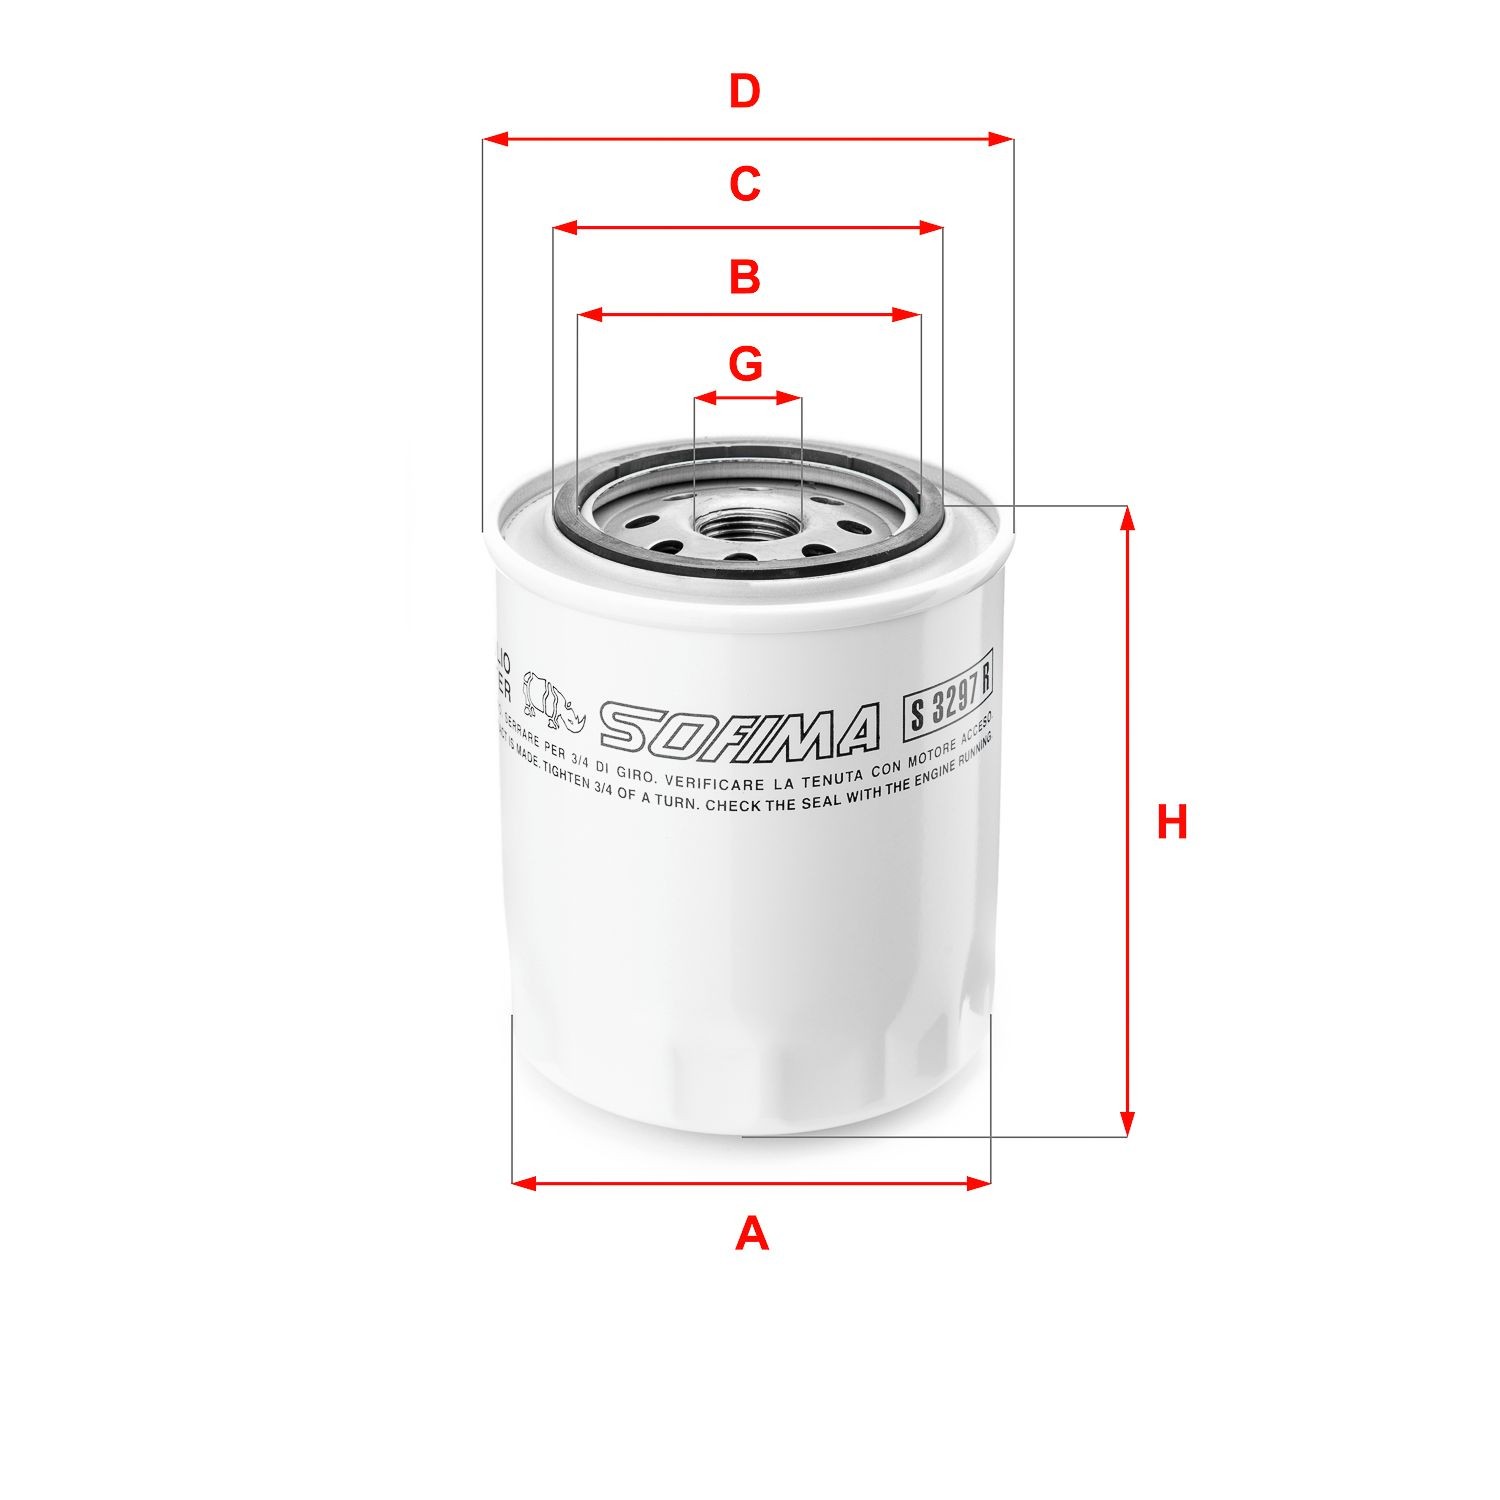 SOFIMA S 3297 R Oil filter 3/4-16 UNF, with one anti-return valve, Spin-on Filter